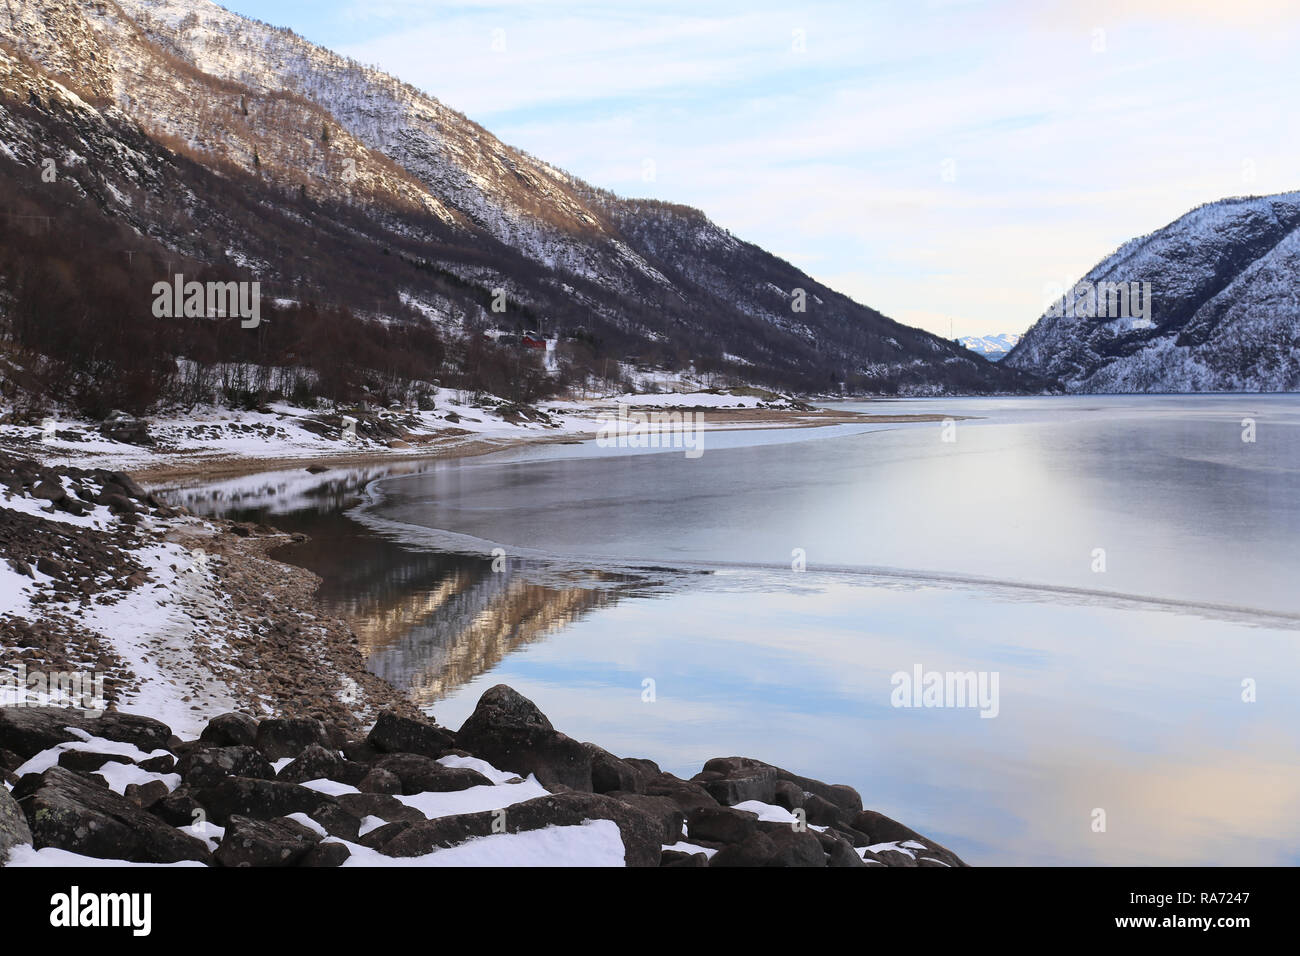 Snowy Mountains Rising vom See Stockfoto